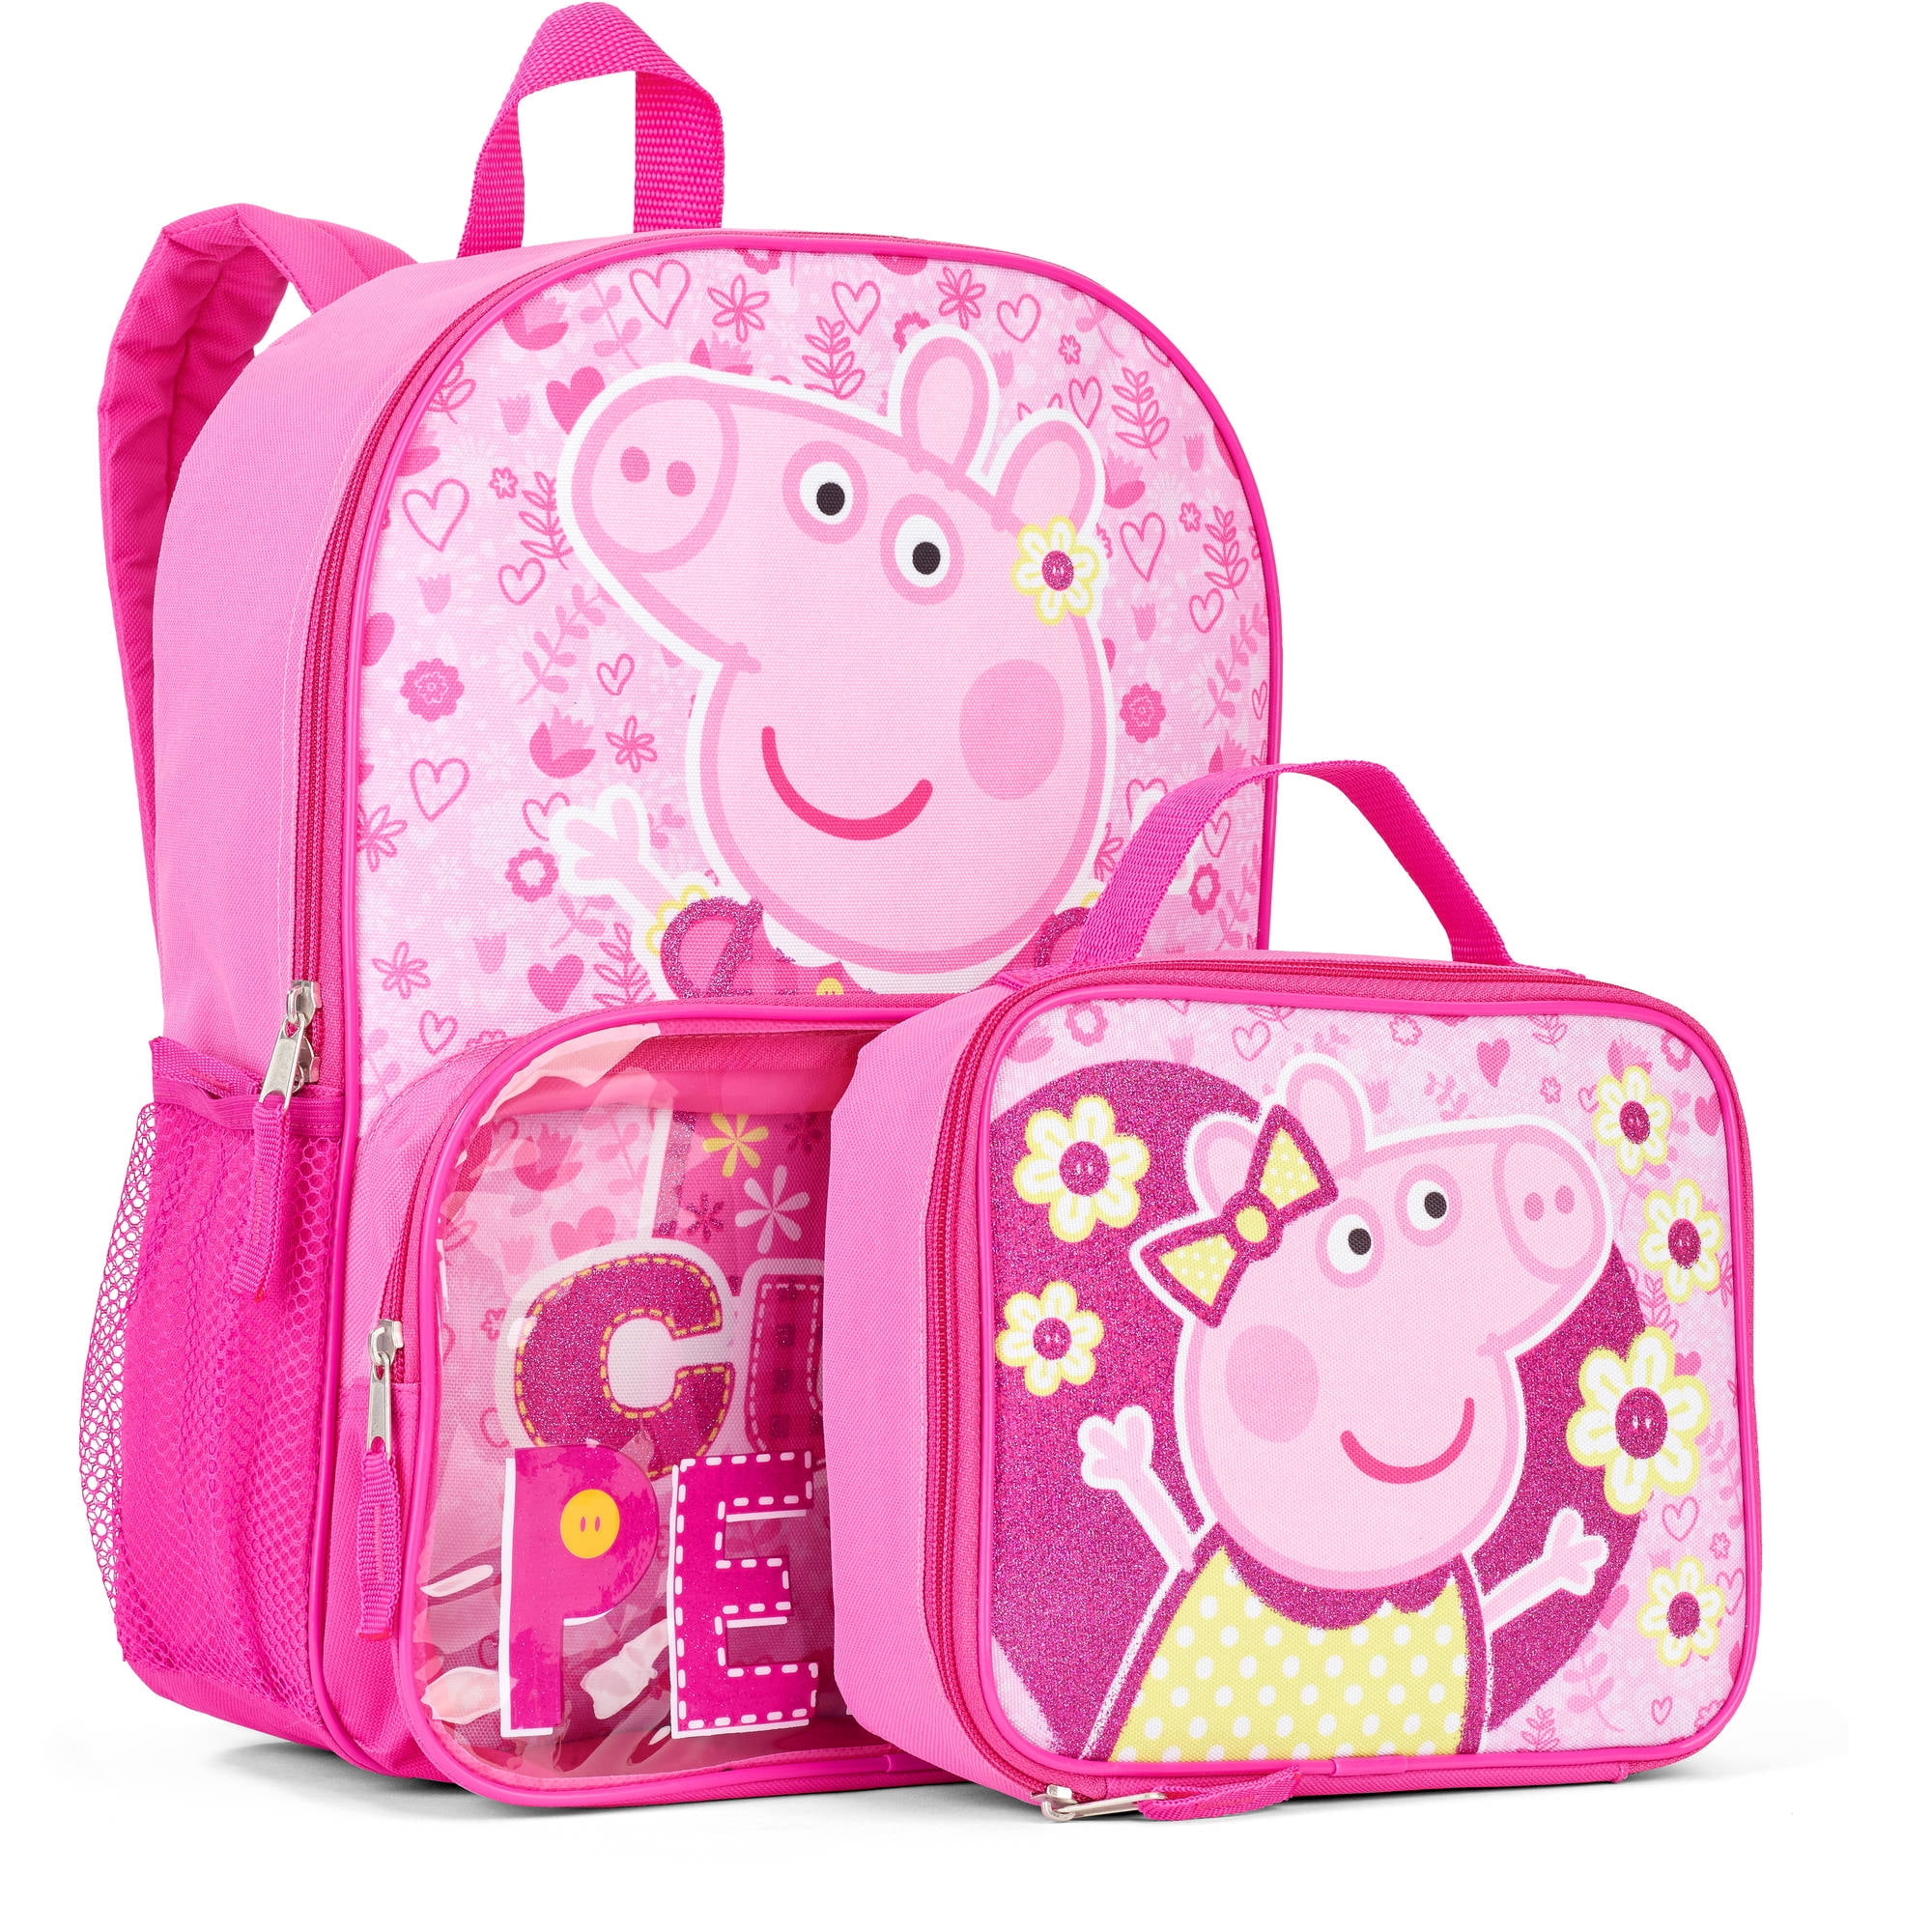 Shop Online Peppa Pig Pink School Bag 12 inches at ₹599